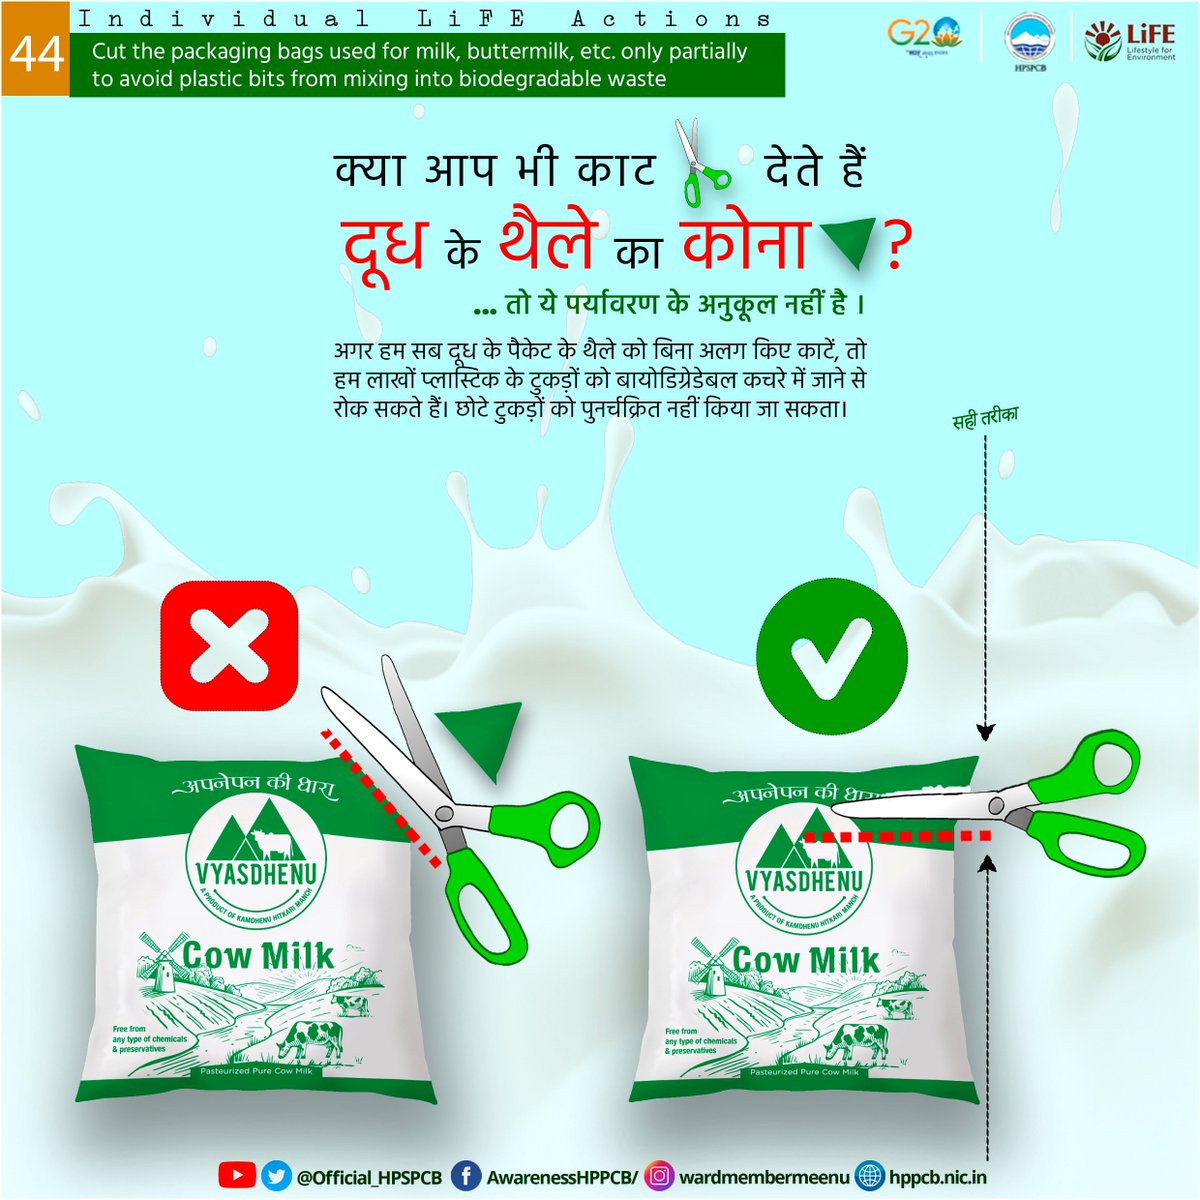 #LifestyleForEnvironment
Cut the packaging bags used for milk, buttermilk, etc., only partially to avoid plastic bits from mixing into biodegradable waste !!
#hpspcb
#chooselife
#AzadiKaAmritMahotsav
#missionlife
#merilife